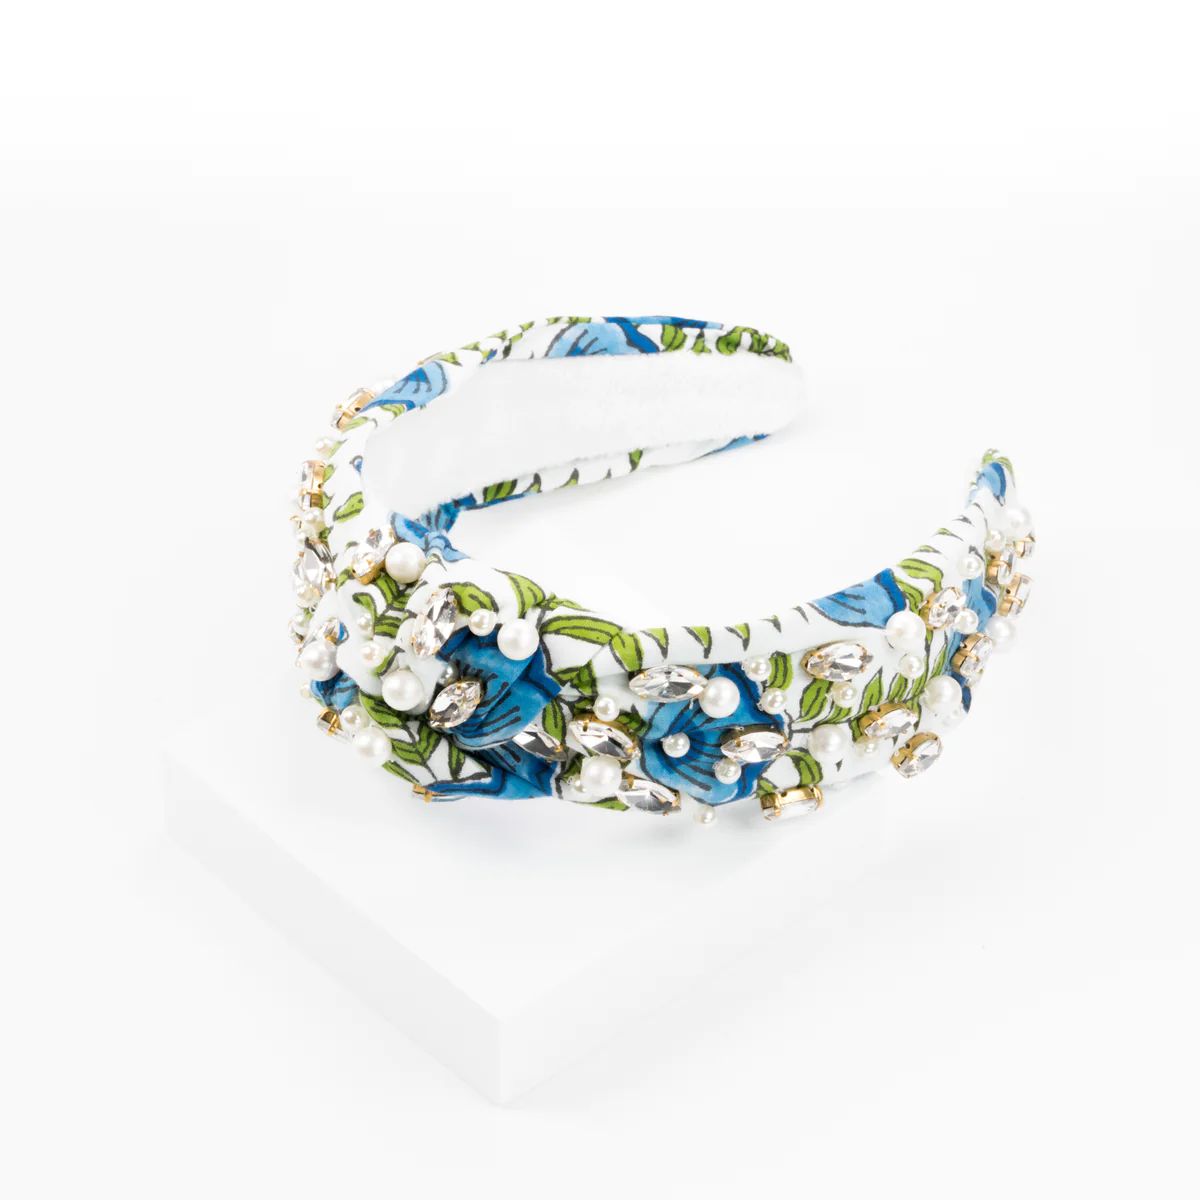 Block Print Headband with Gems in Harbor Springs Floral | Beth Ladd Collections